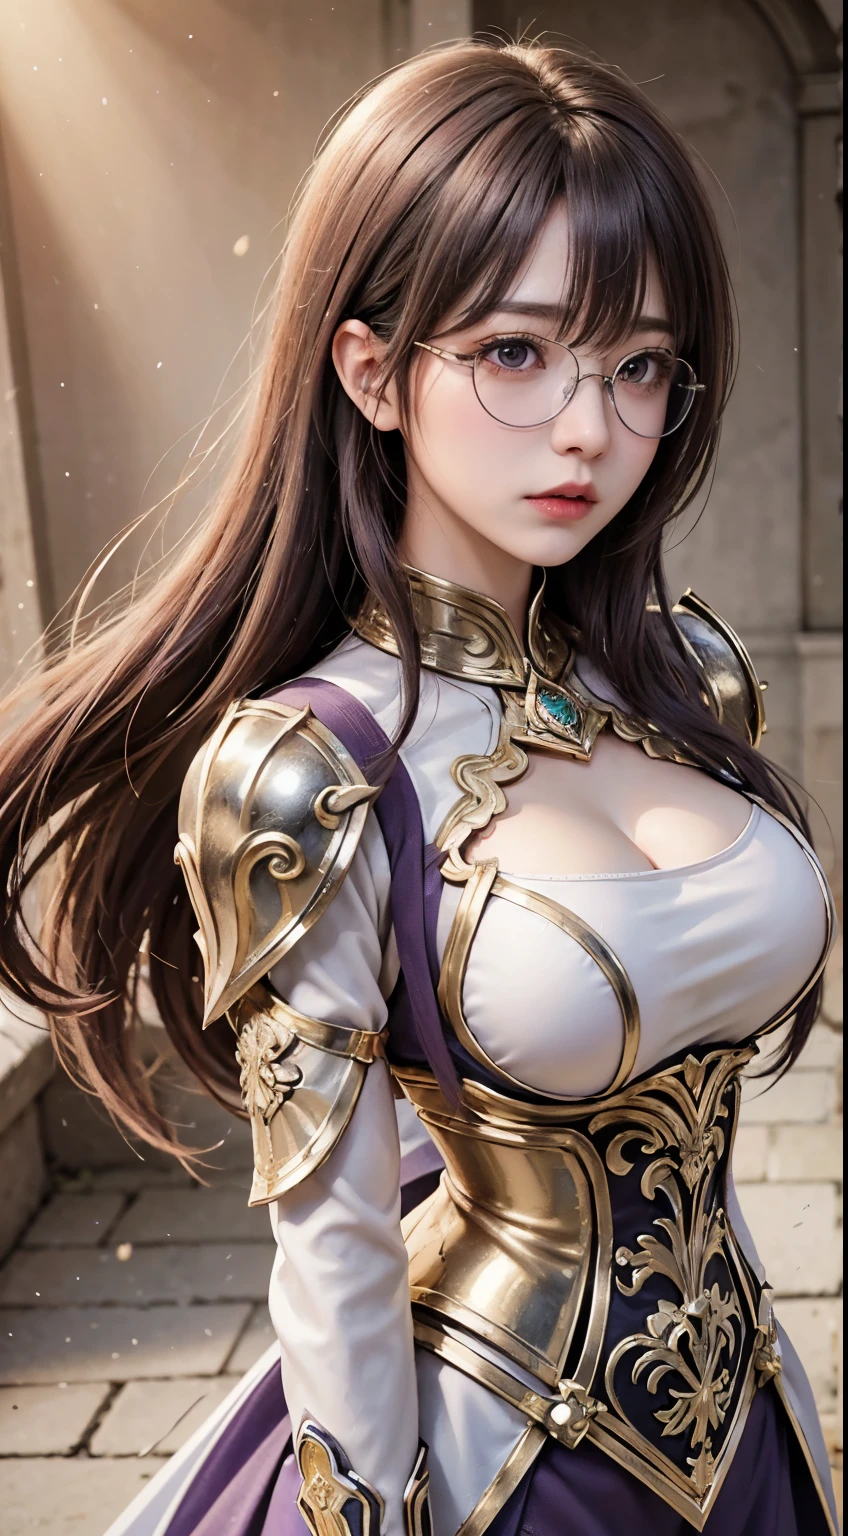 up，Wearing a white shirt、Purple Hair，Very long hair，very thick braids，Purple eyes，big 、((((Glasses))))、realistic girl rendering, 8k artistic german bokeh, Enchanting girl, Realistic girl, Gurwitz, Gurwitz-style artwork, Girl Roleplay, Realistic 3d style, cgstation Popular Topics,, 8K Portrait Rendering,（truth，truth：1.4），Wear pink pajamas，巨big ，Sparkling eyes，Purple eyes、"(highest quality: 1.2), masterpiece, extremely detailed 8k uhd, ((Official Art)), CG, 1 Ultra-Detailed Goddess of War, A temple in the ruins of a ruined empire々Standing Up Together, (Dynamic posture: 1.3), Thick armor reveals the heart of the conflict, (Finer details), Shine, Places with strong light, (armor of historical importance:1.2), Shine Metal Armor, ((((Glasses))))、(Shine magic symbol on armor:1.3), (There was magic all around her.:1.3), Long black hair waving in the wind in every detail, Detailed Weapon Holding, (Sharp Sword, Shine:1.3), Shine eyes filled with determination and vision, ((Silver Armor)), A shield that reproduces the symbol of immovability with ultra-precision., (intense expression:1.1), (After her, A new empire is soaring into the sky: 1.4), (Light is、Highlighting her dominance and rebirth behind the scenes:1.4), (Fiery red flags fluttered:1.1), (The wind carries whispers of new beginnings:1.1), (Wisdom and Regeneration:1.2), (Strong stance:1.2), (Overwhelming Mystical Power:1.2), alone, (Shine sweat:1.1), gem armor, (The contrast between silver and gold:1.3), (The overall red color covers the scenery:1.4)"